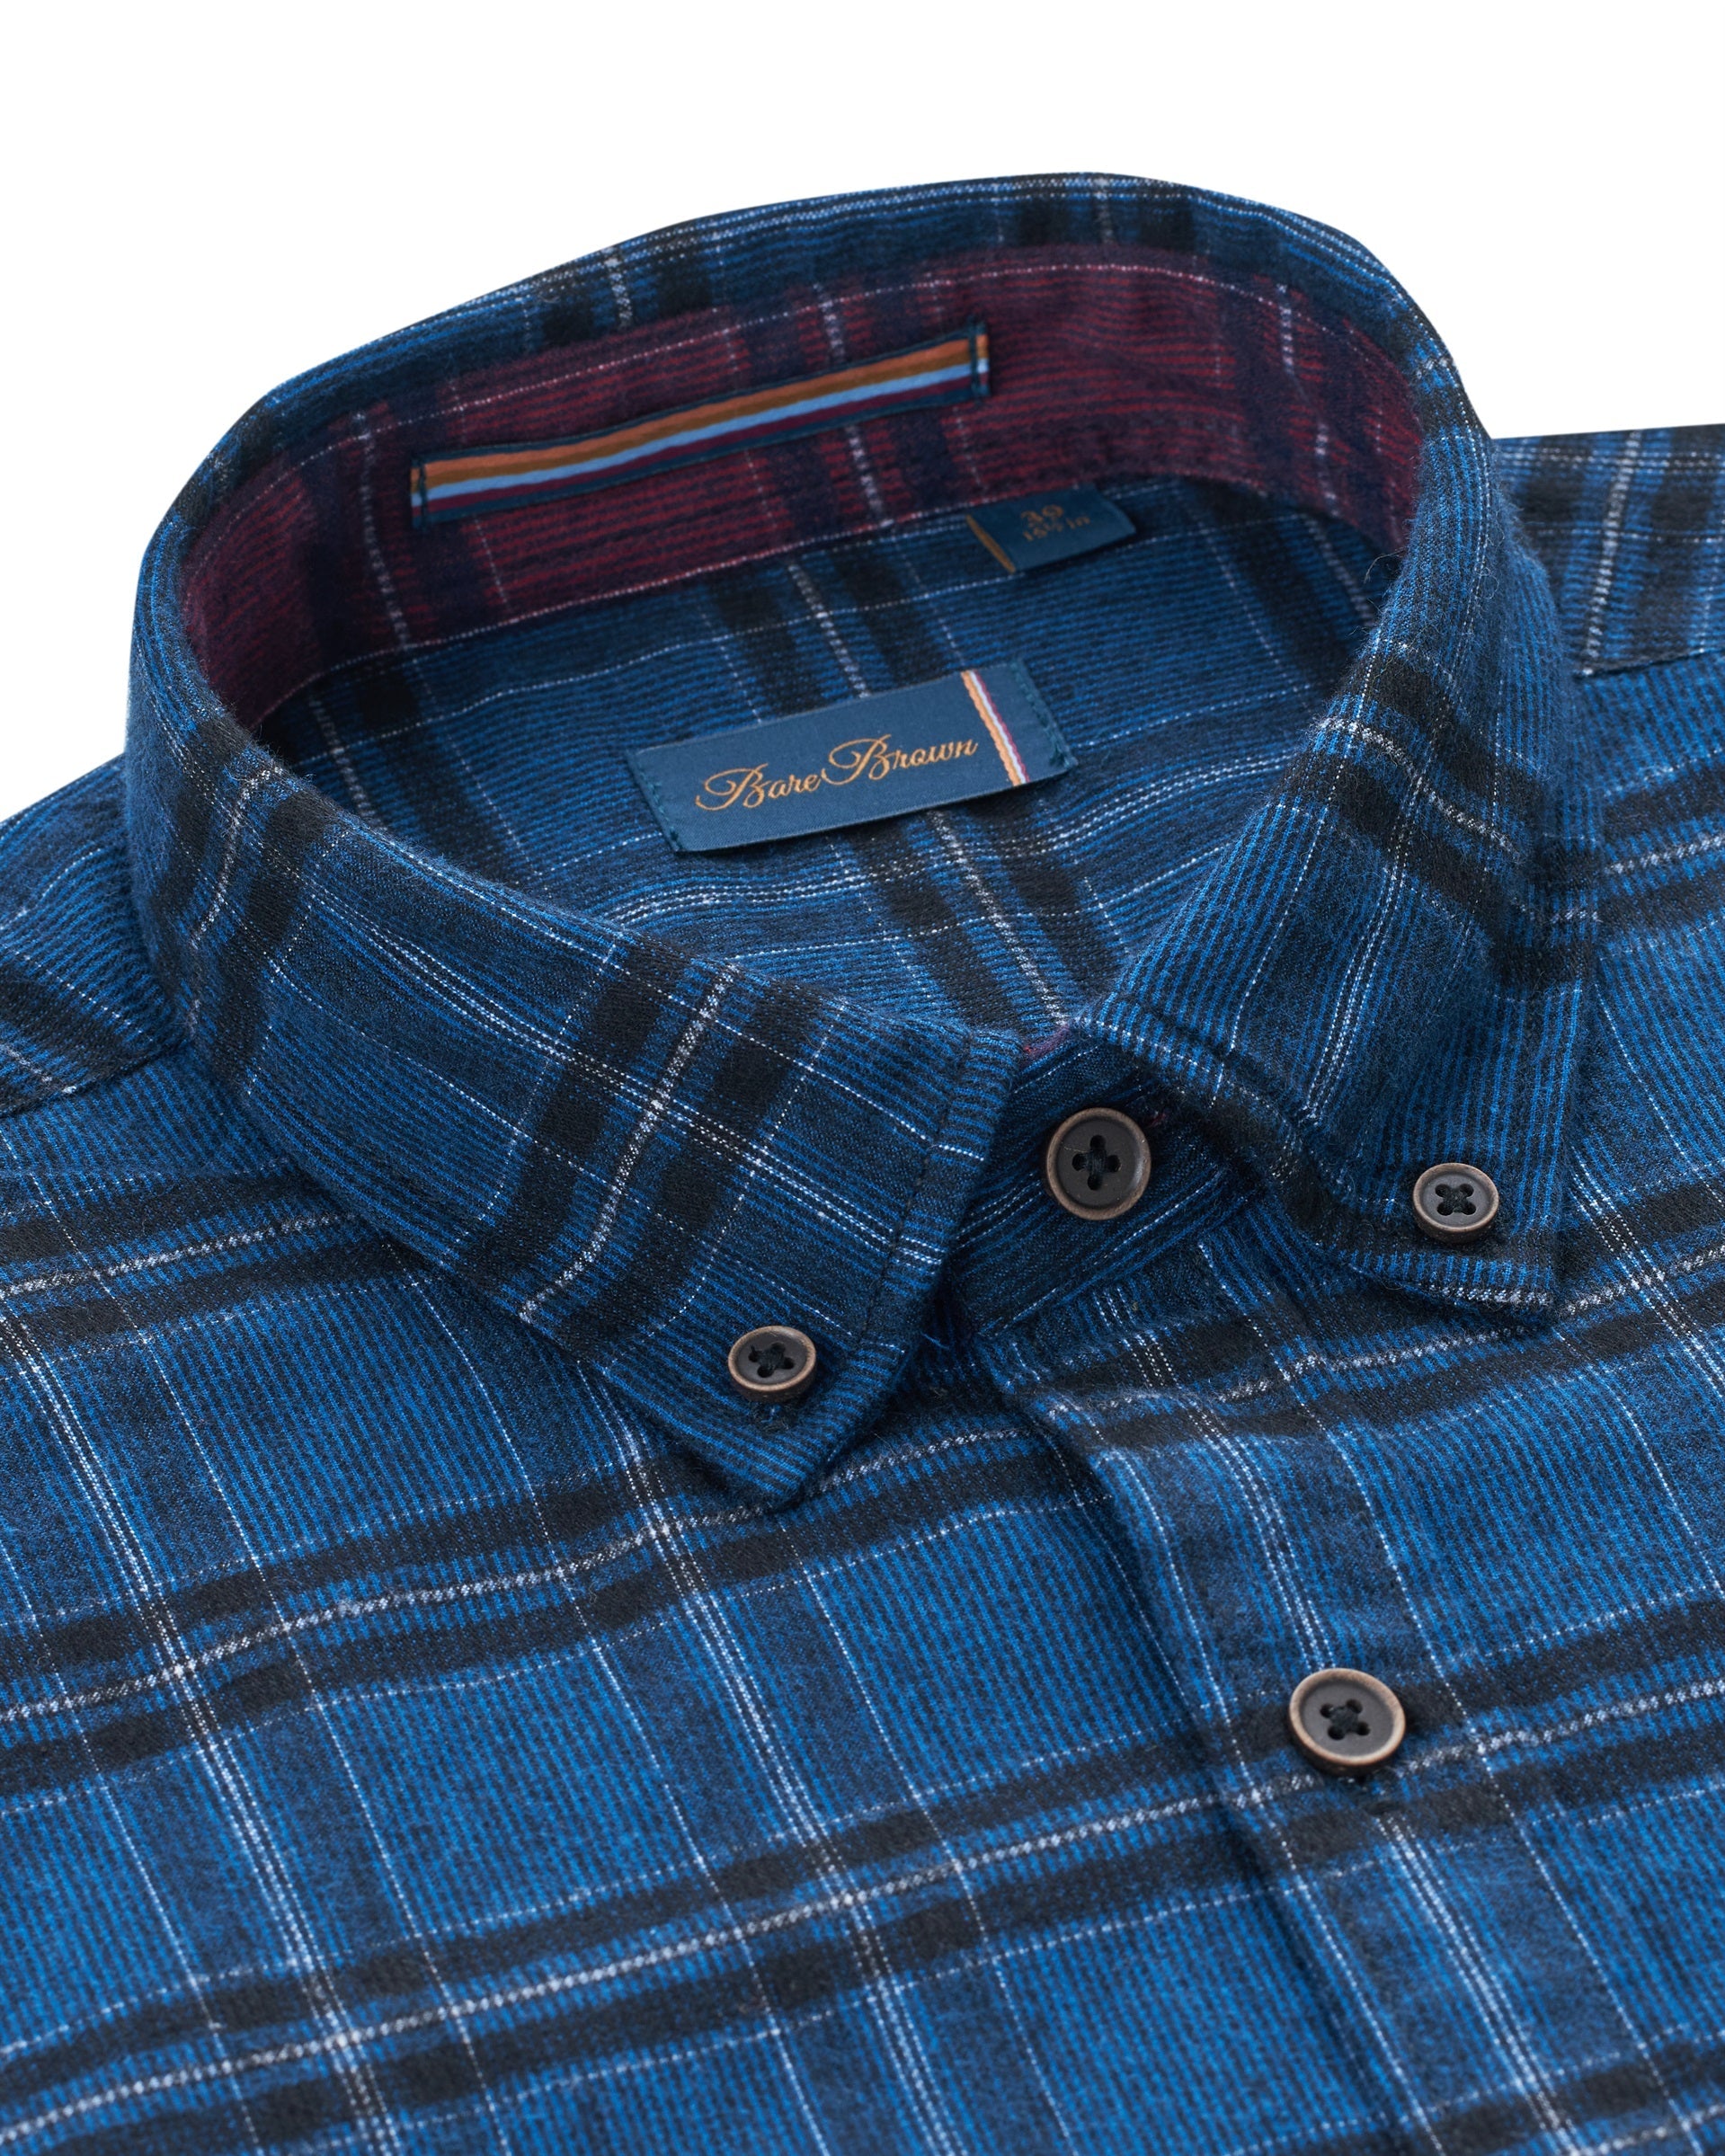 Bare Brown Corduroy Check Cotton Shirt, Slim Fit with Full Sleeves - Blue